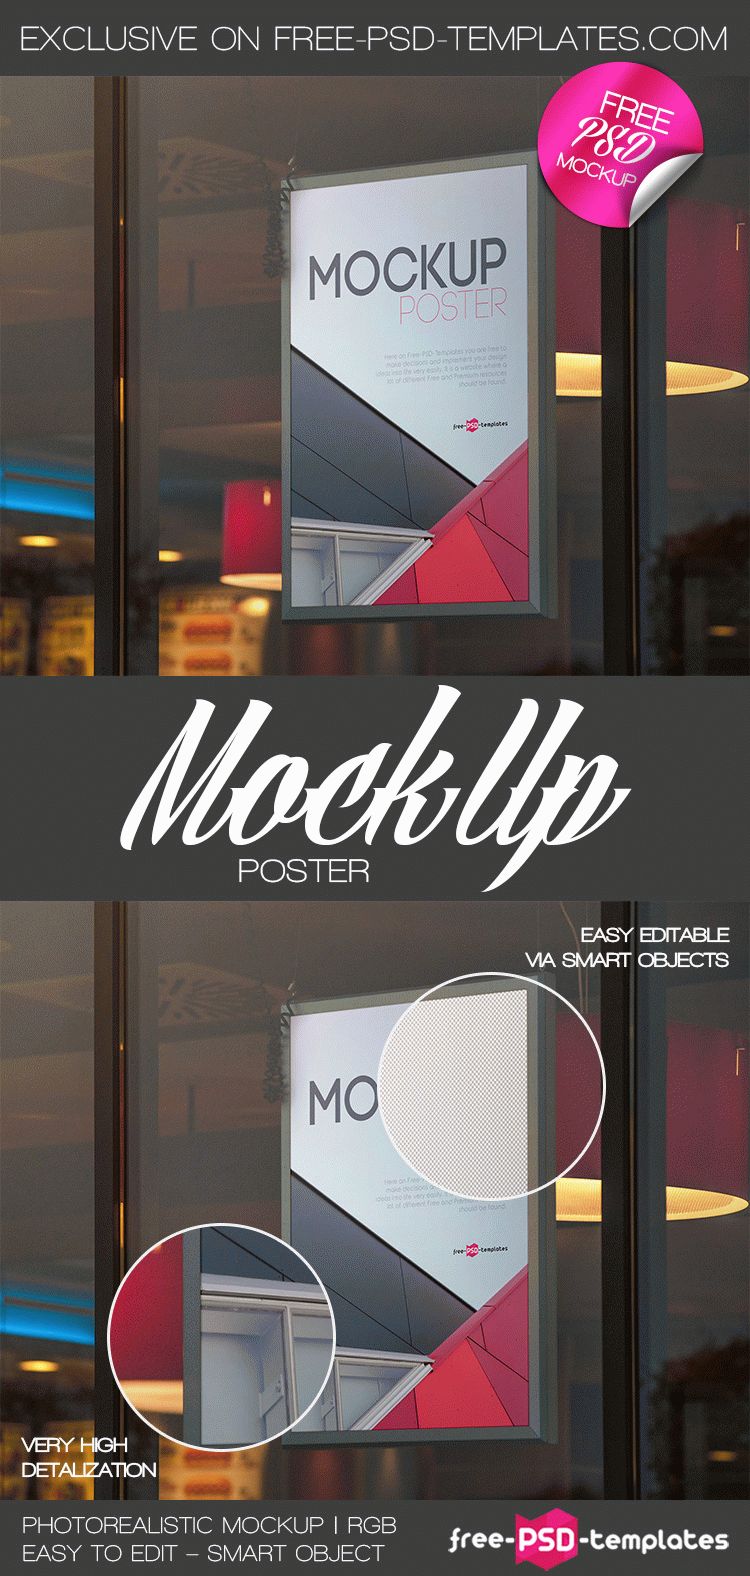 Download Free Poster Mock-up in PSD | Free PSD Templates